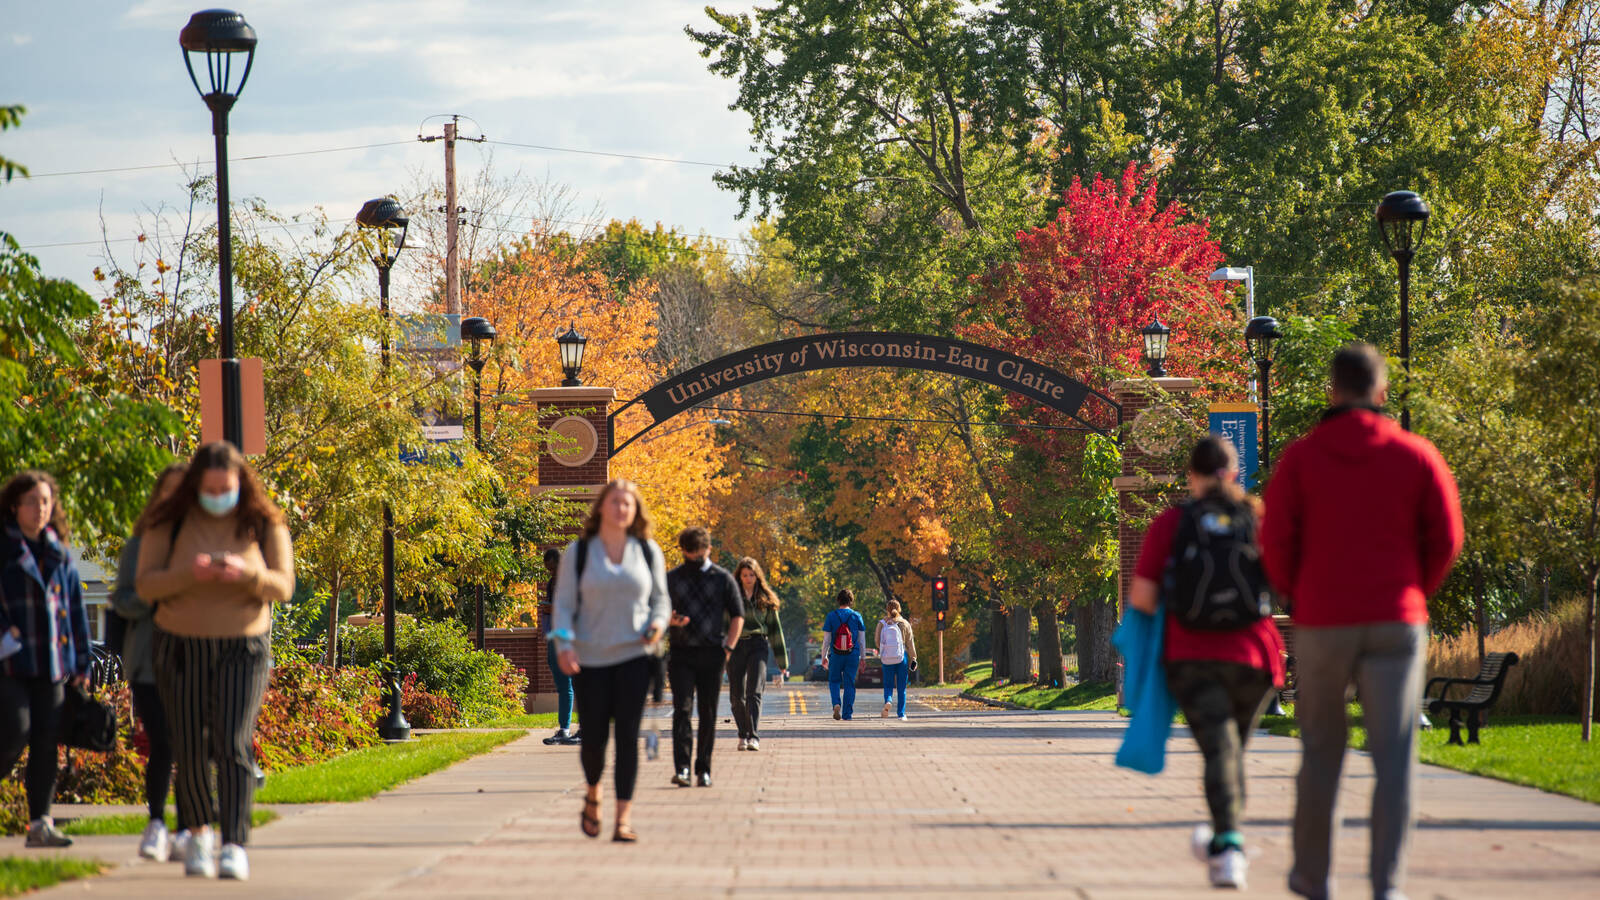 Students walking on walkway among fall leaves with University of Wisconsin - Eau Claire arch in background.